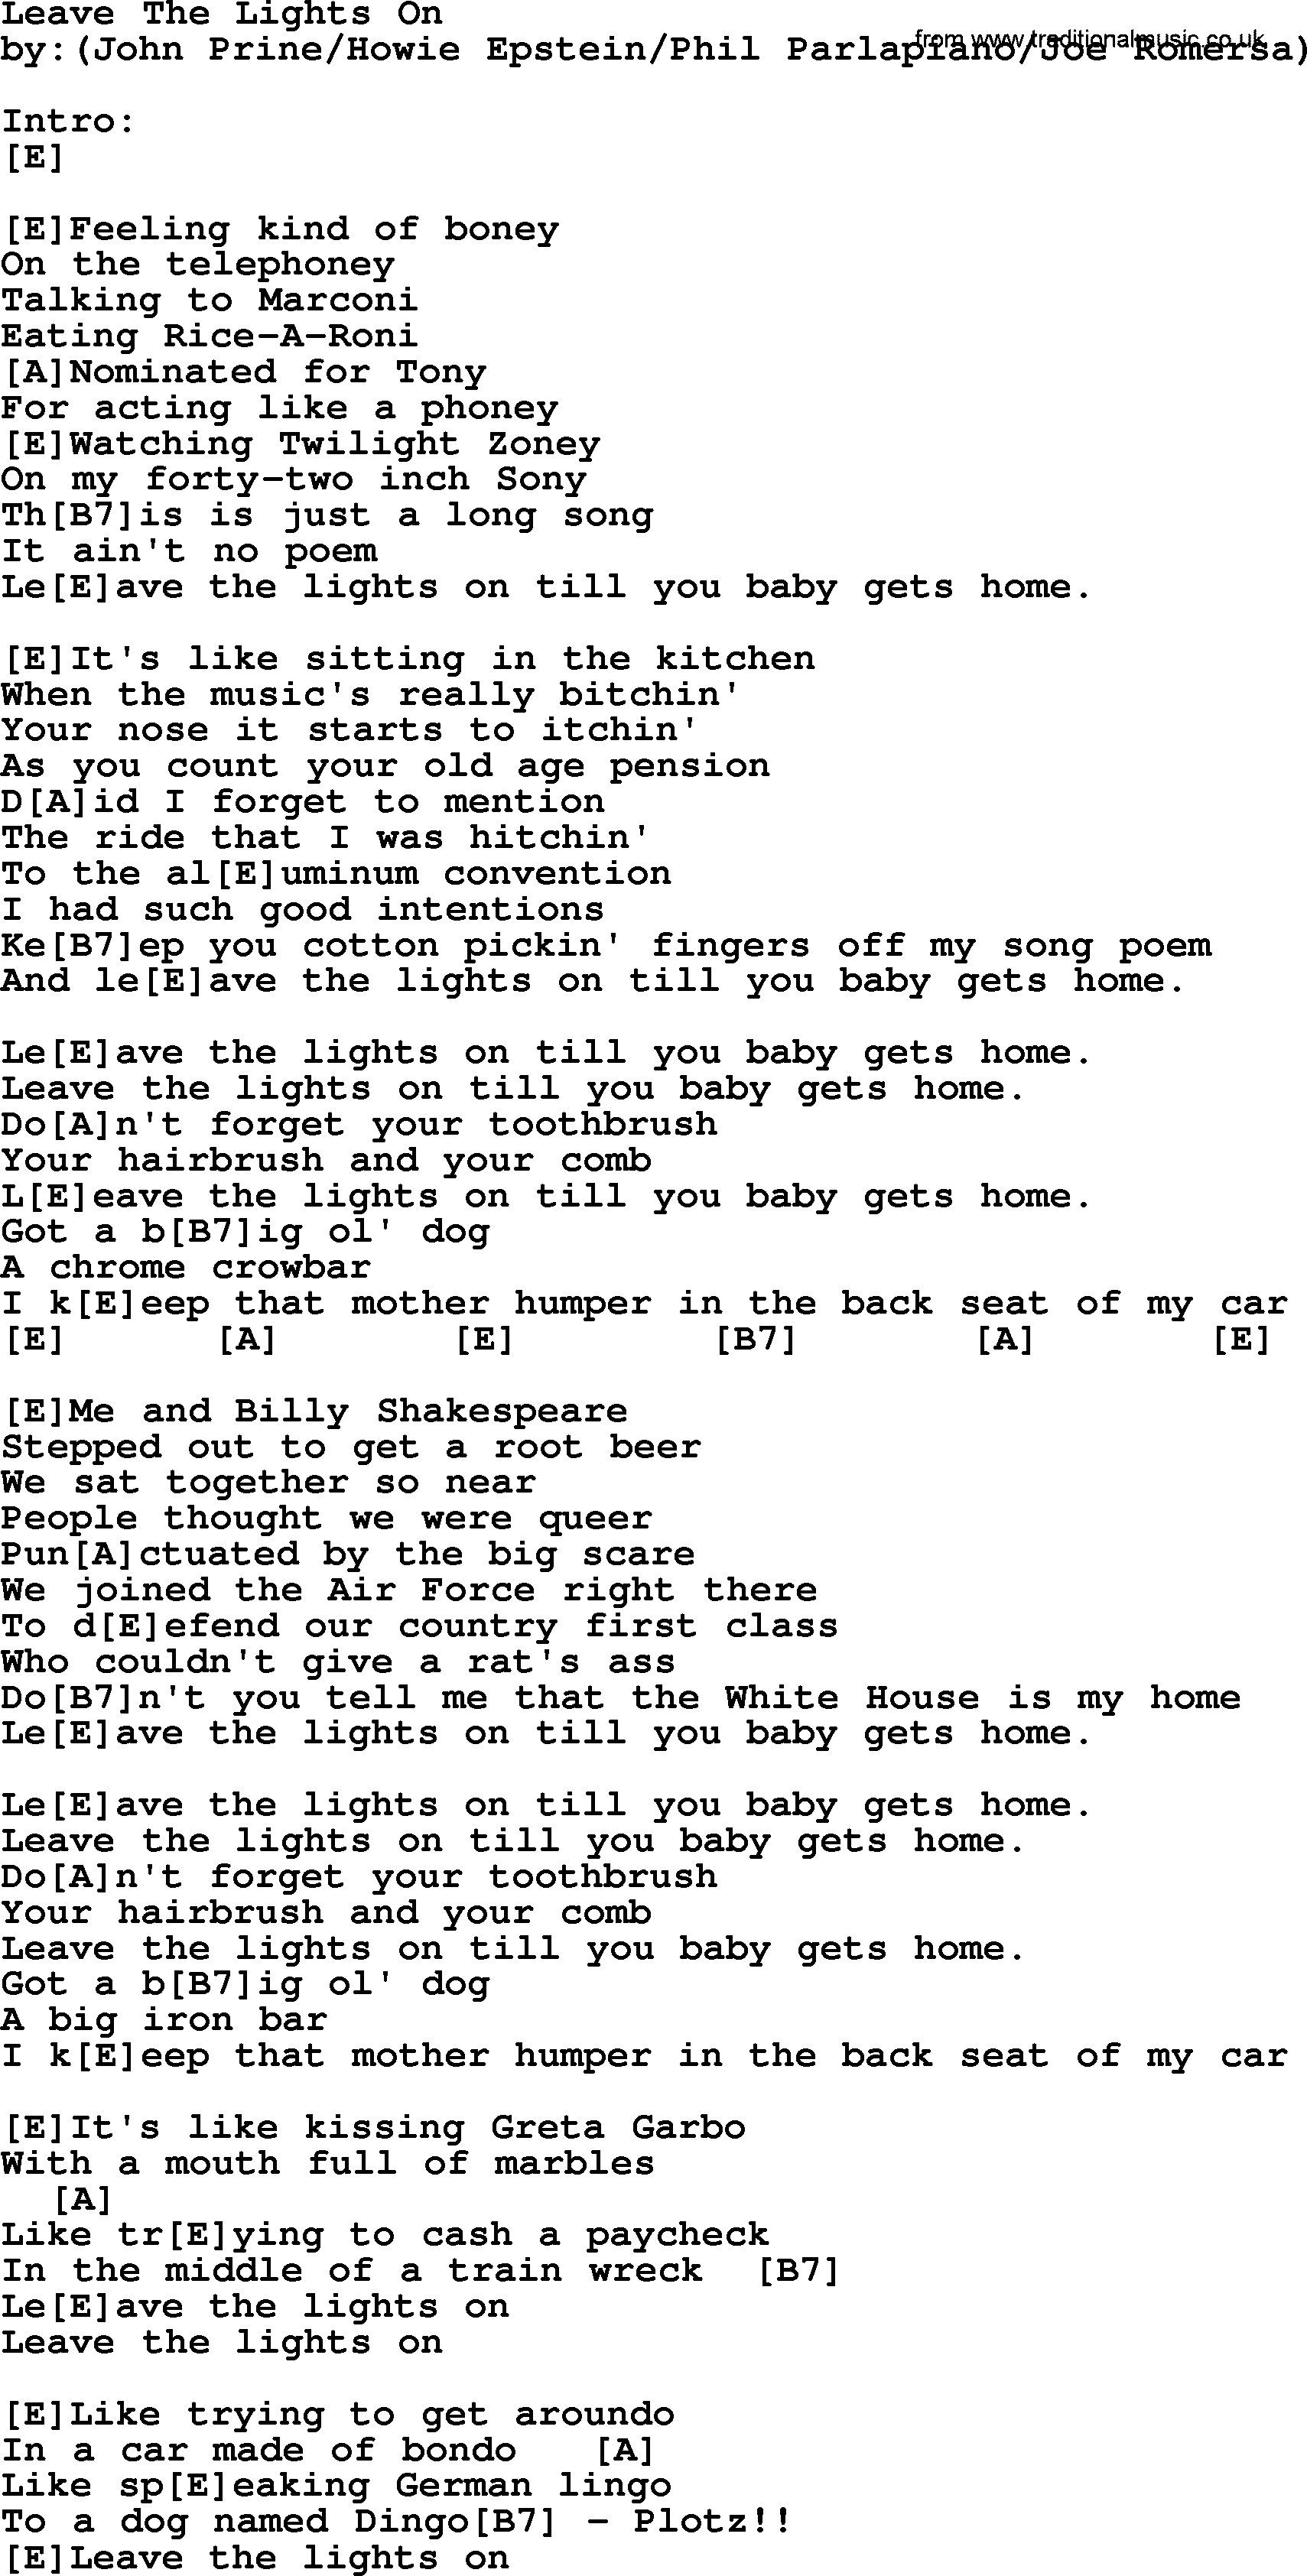 Bluegrass song: Leave The Lights On, lyrics and chords